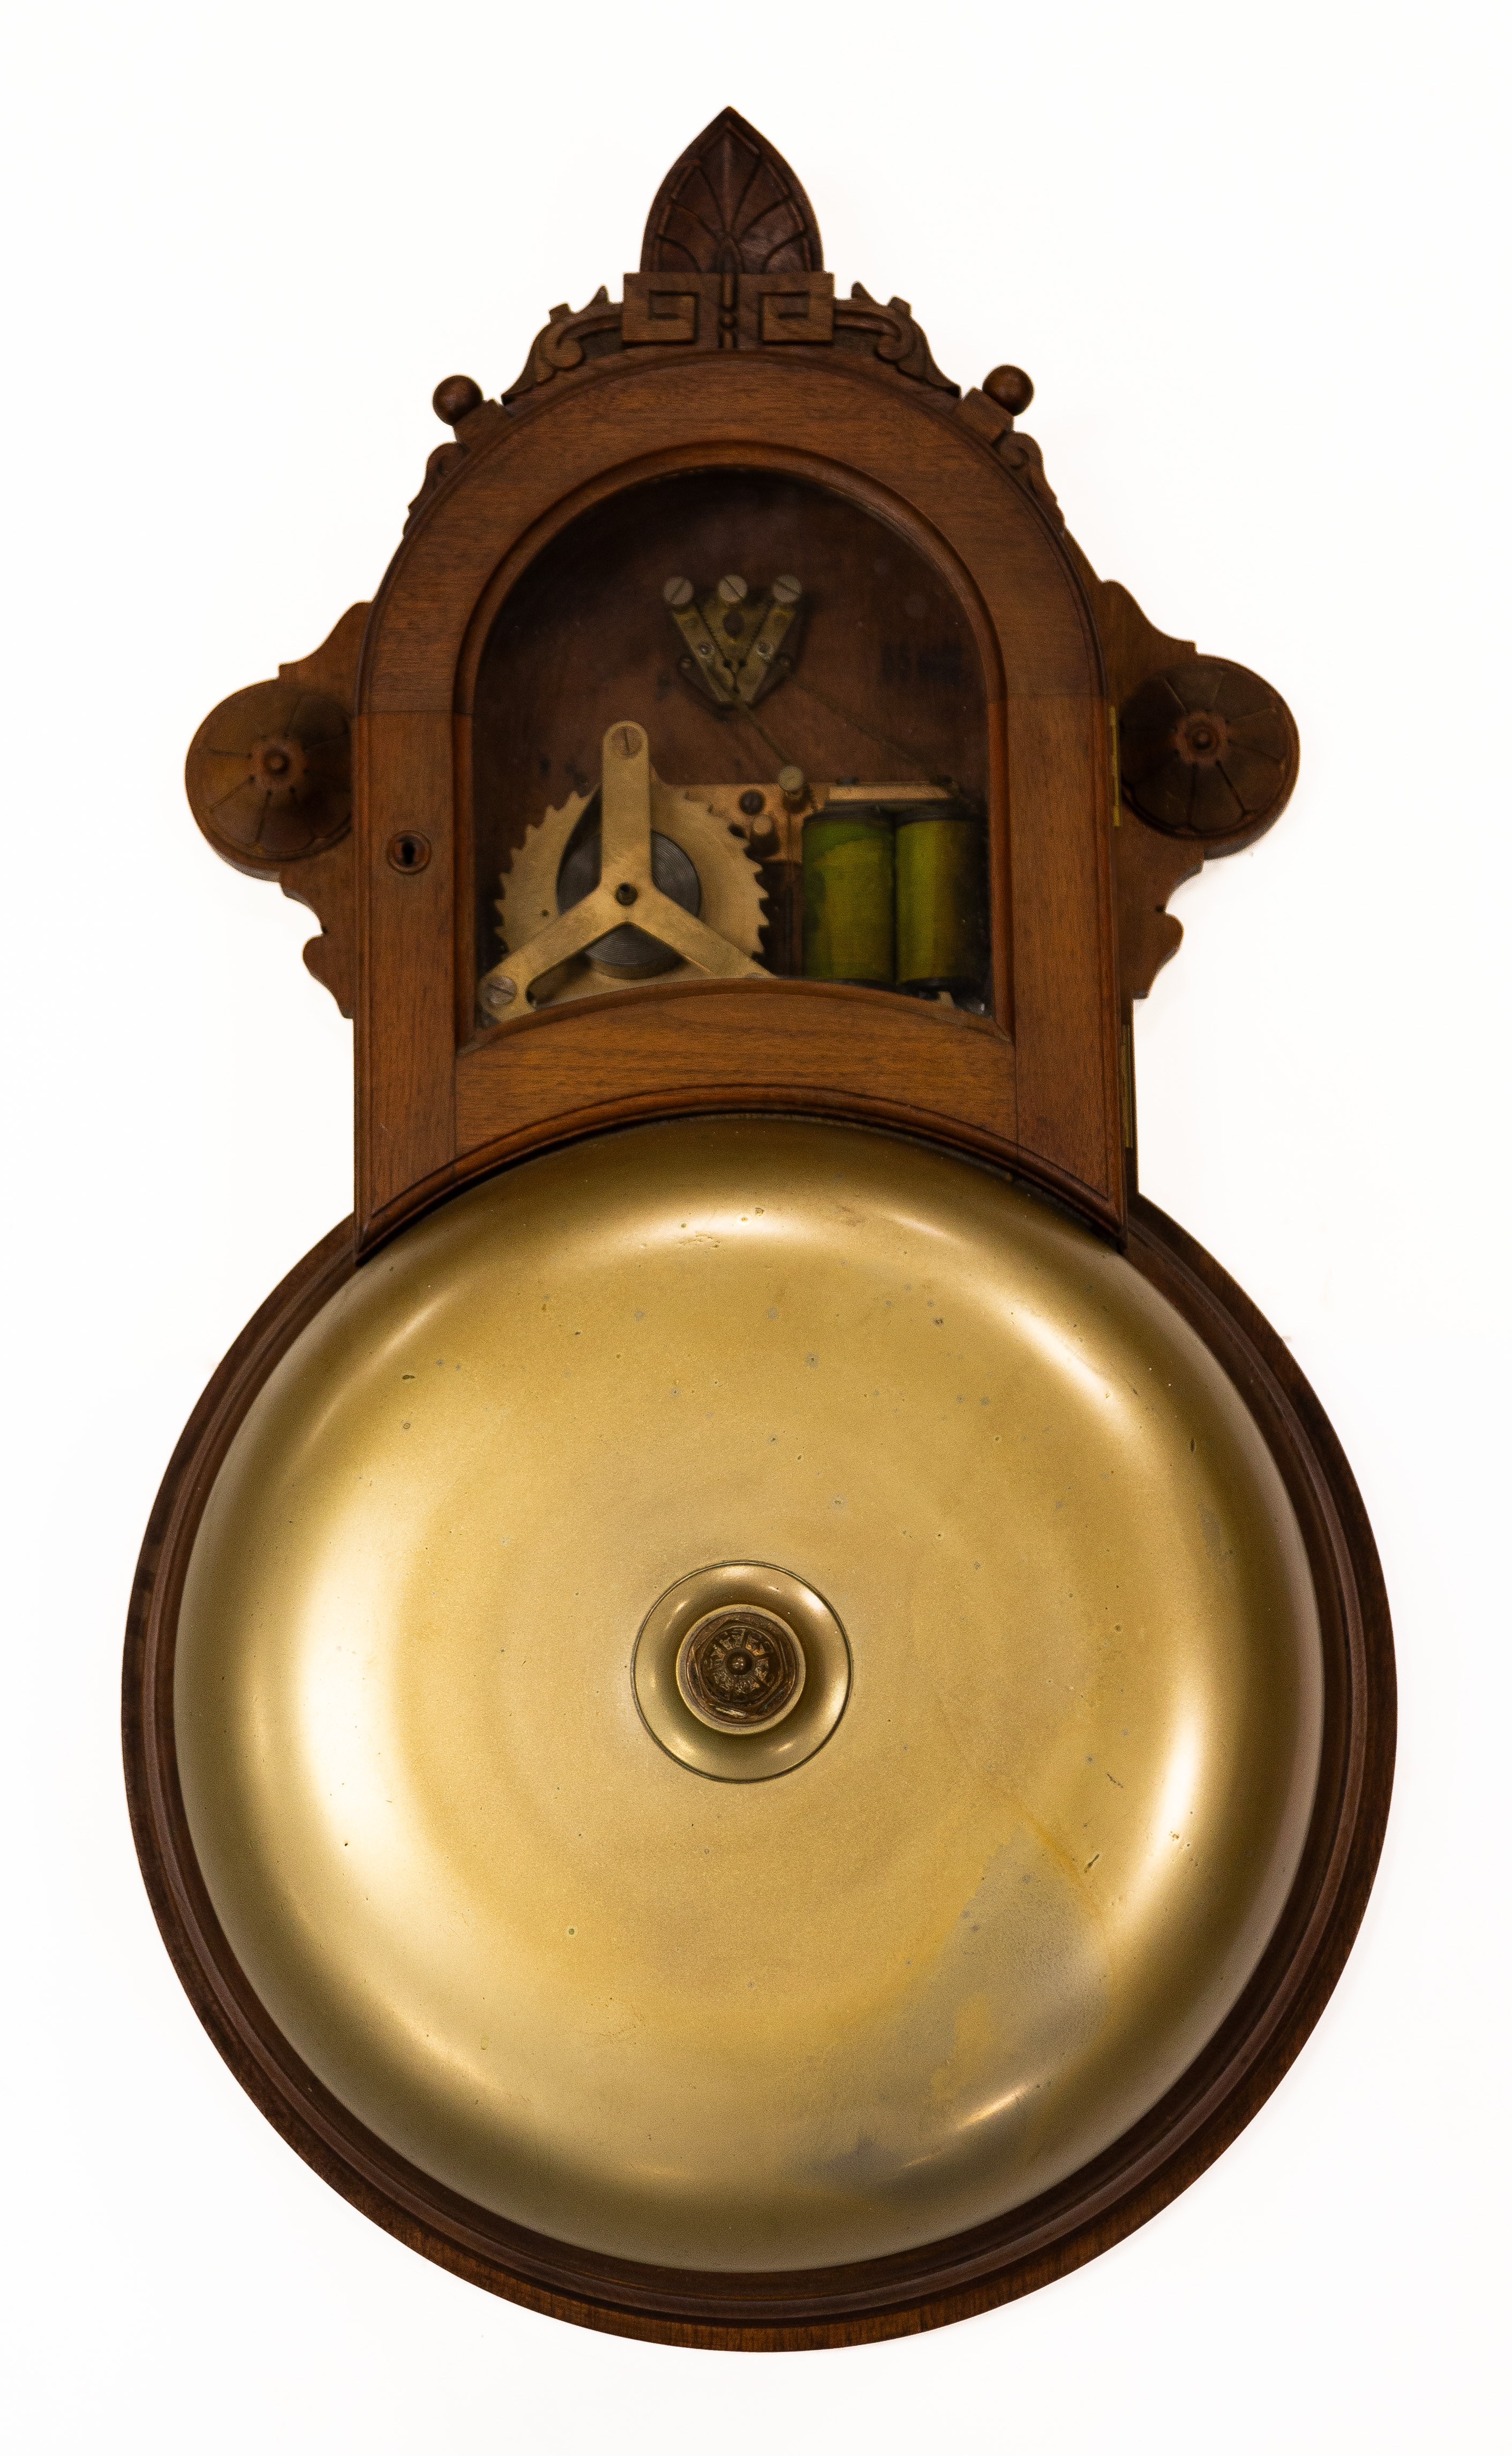 GAMEWELL FIRE BELL Carved walnut